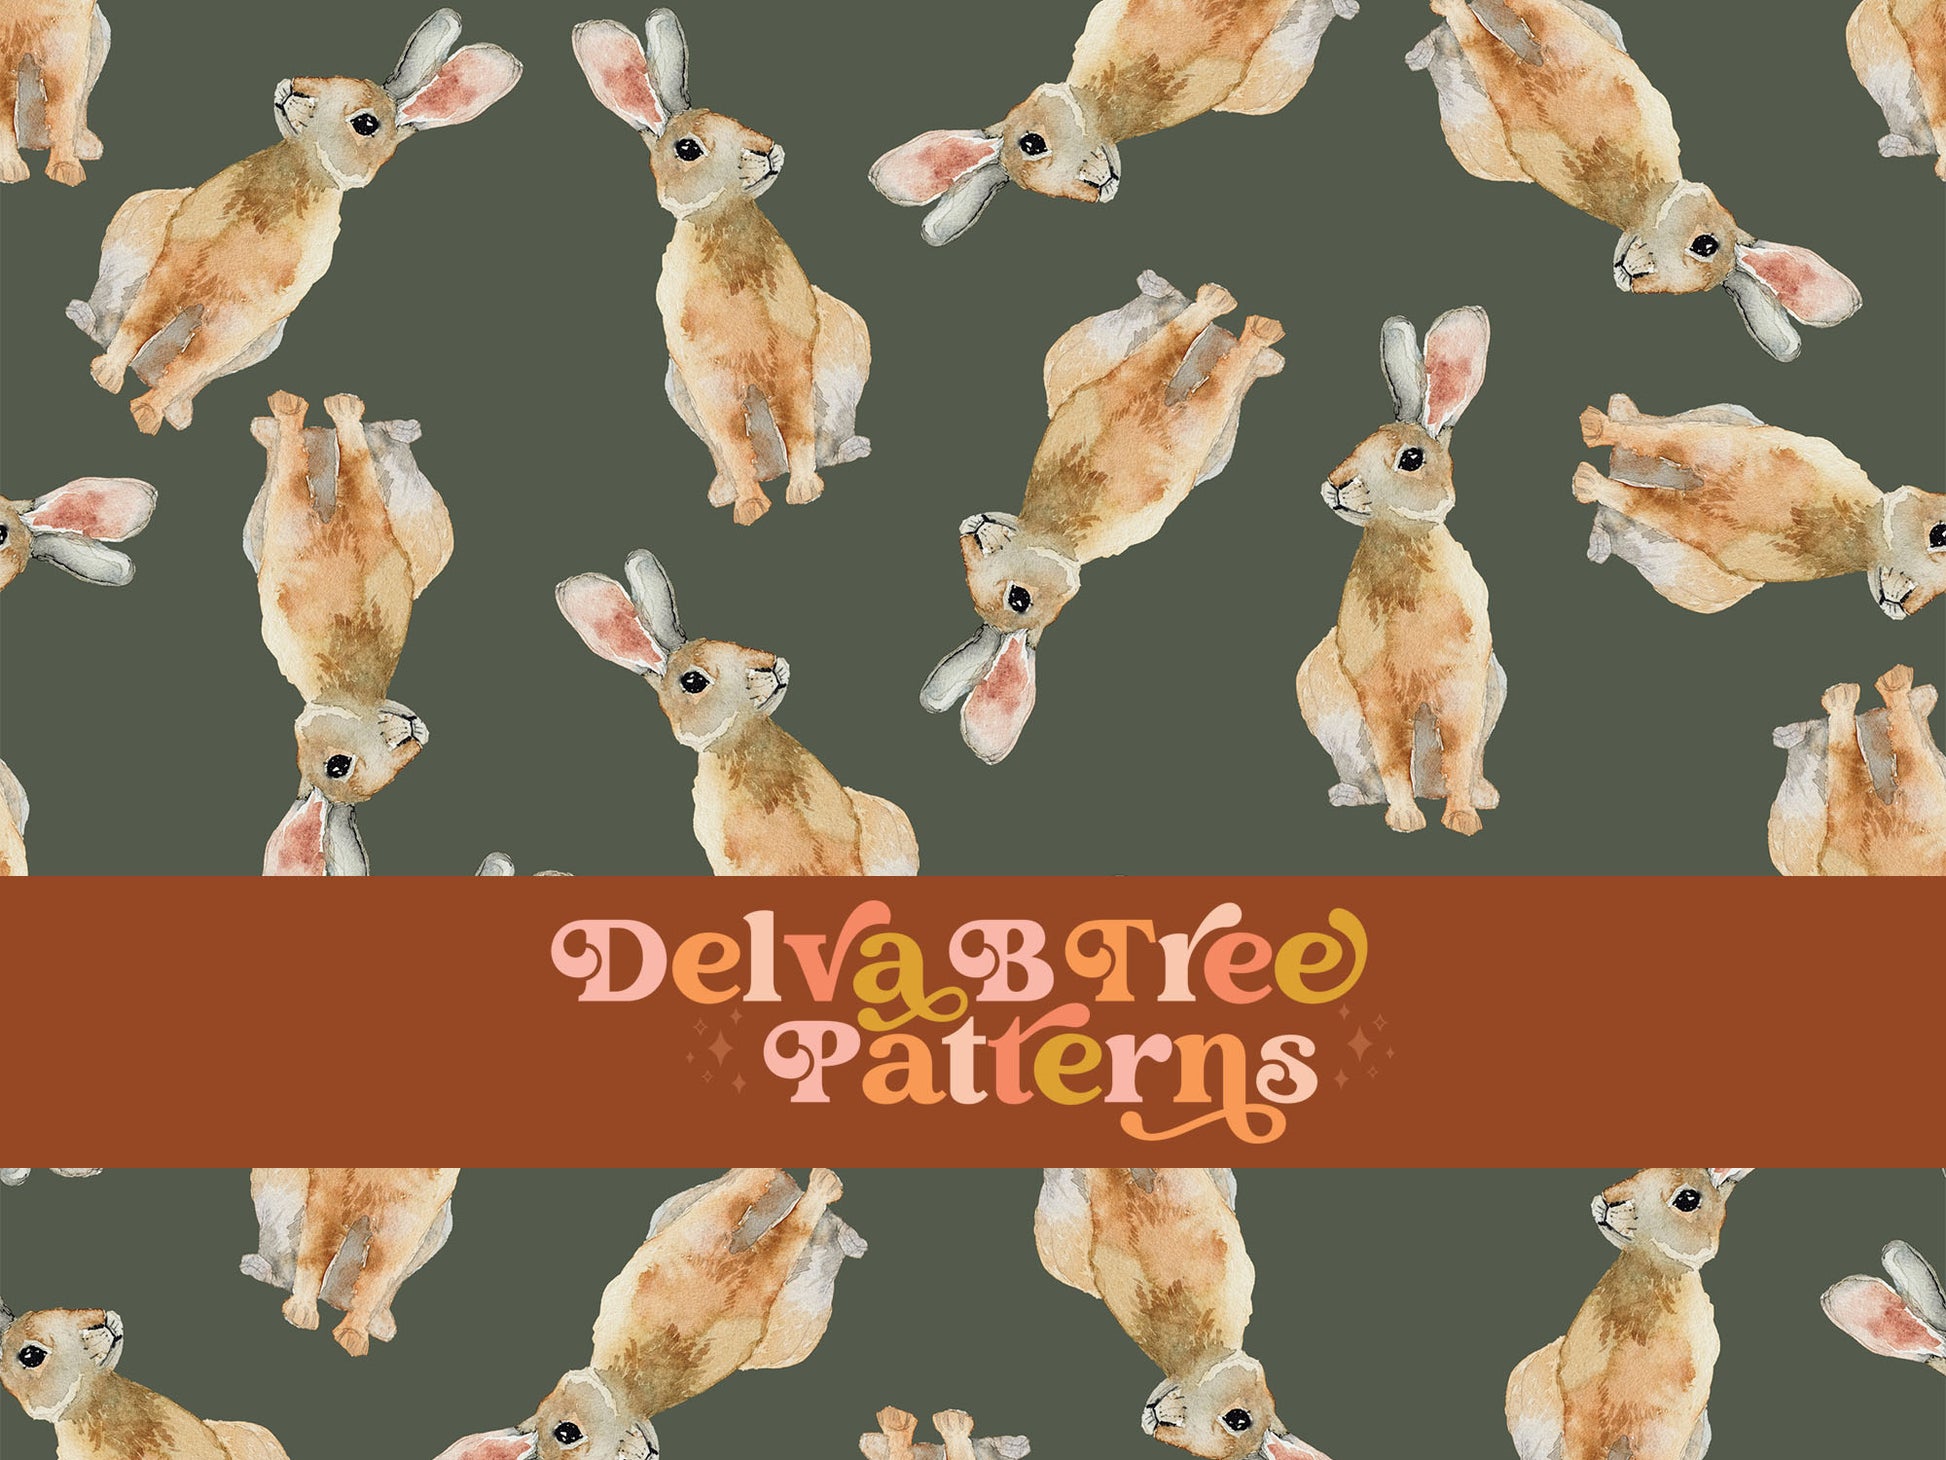 Watercolor bunny rabbits on a thyme green background seamless file for fabric printing. Gender Neutral retro look Bunnies Repeat Pattern for textiles, polymailers, baby boy lovey blankets, nursery crib bedding, kids clothing, girls hair accessories, home decor accents, pet products.